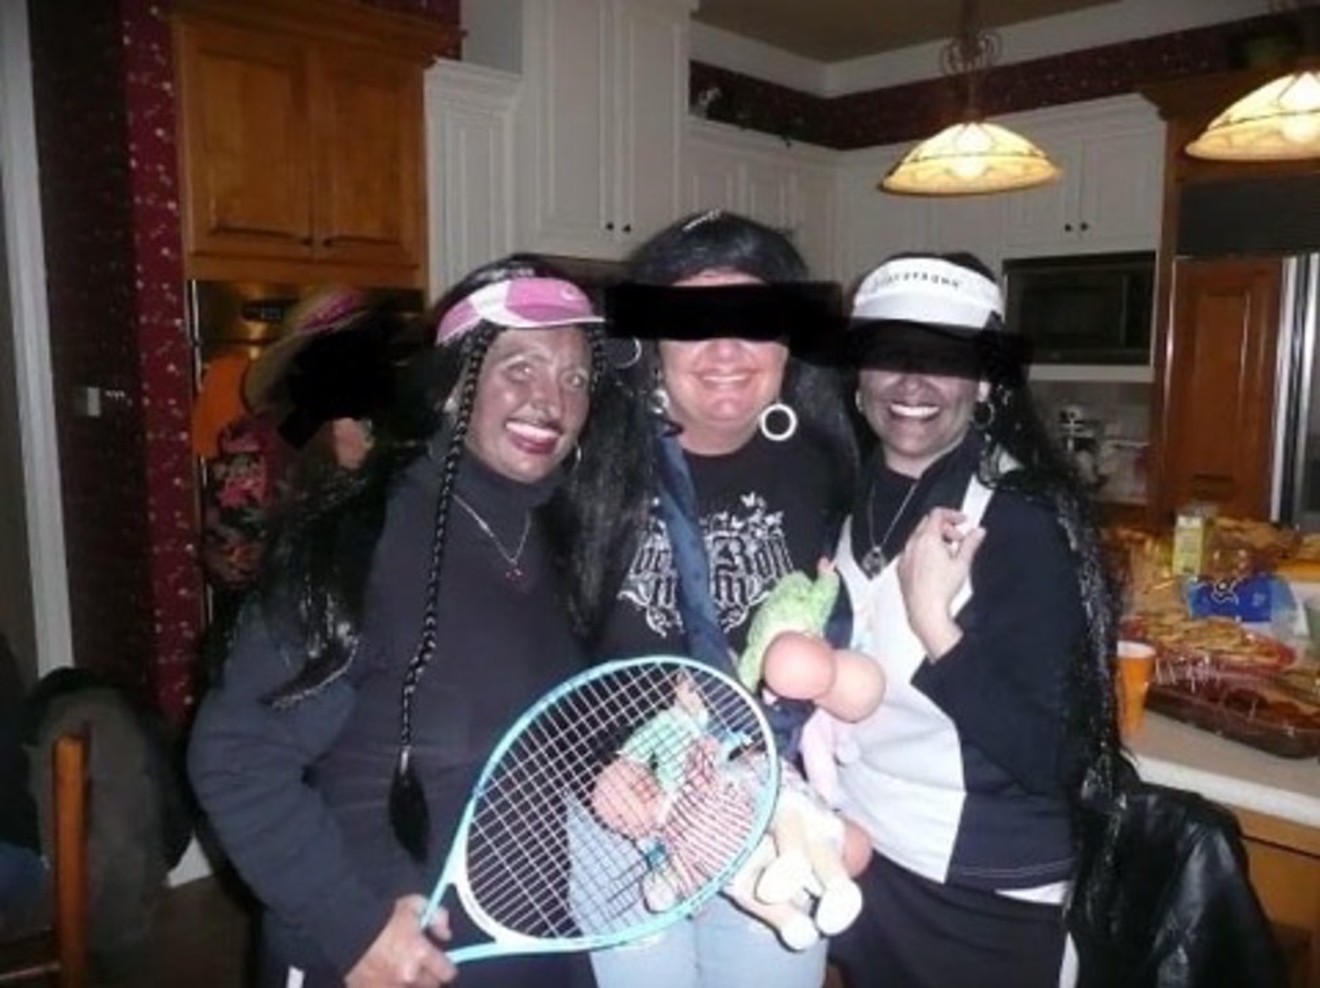 Midlothian ISD Board of Trustees member Tami Tobey, left, poses with two unidentified women at a Halloween party in 2012. Tobey, who is white, and another woman wore blackface as a part of their costumes.